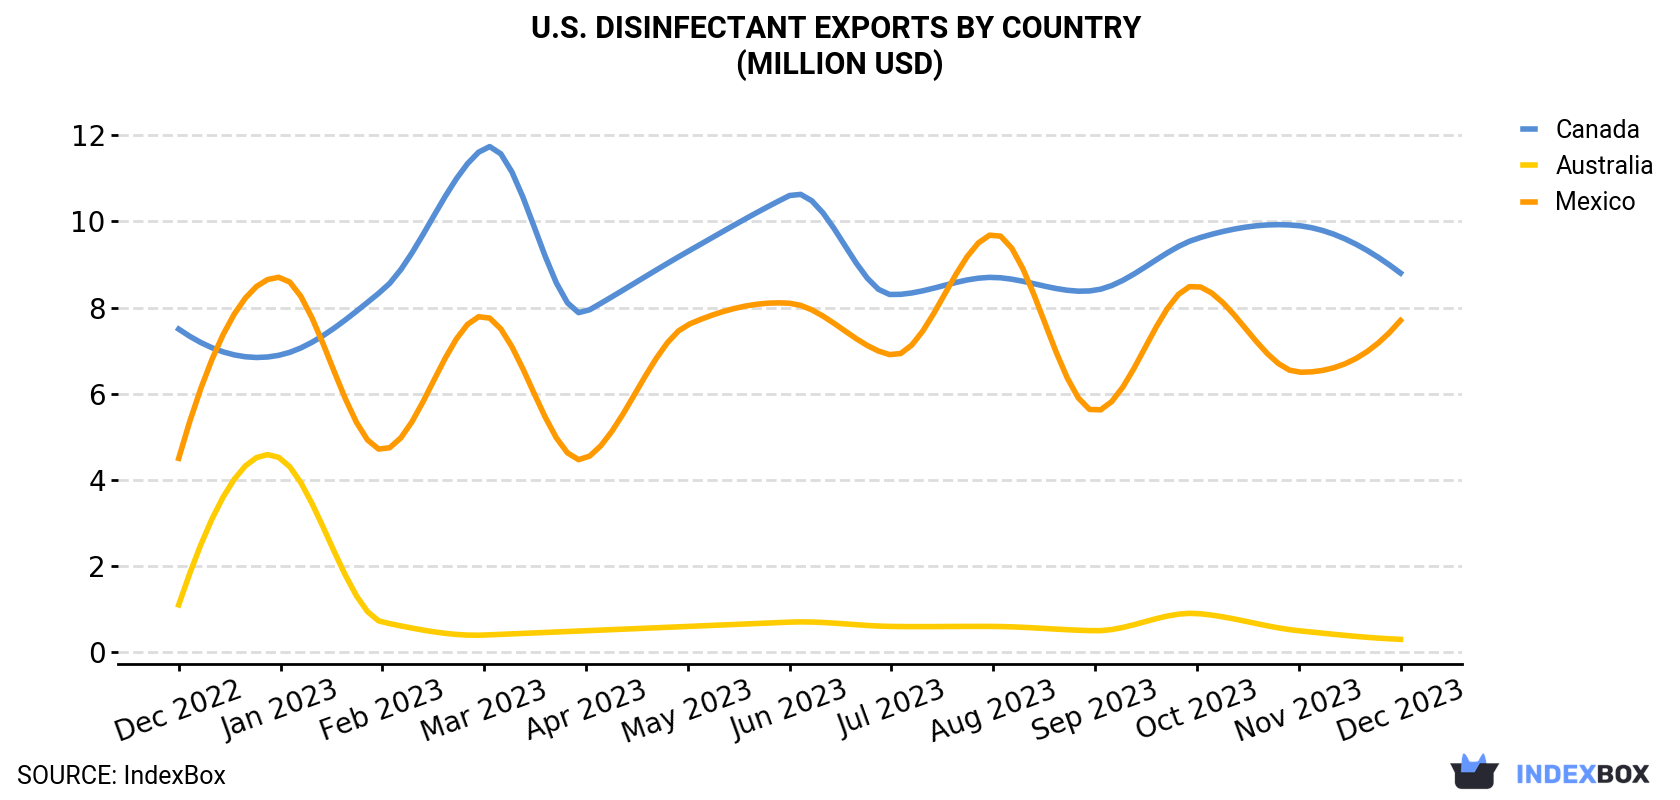 U.S. Disinfectant Exports By Country (Million USD)